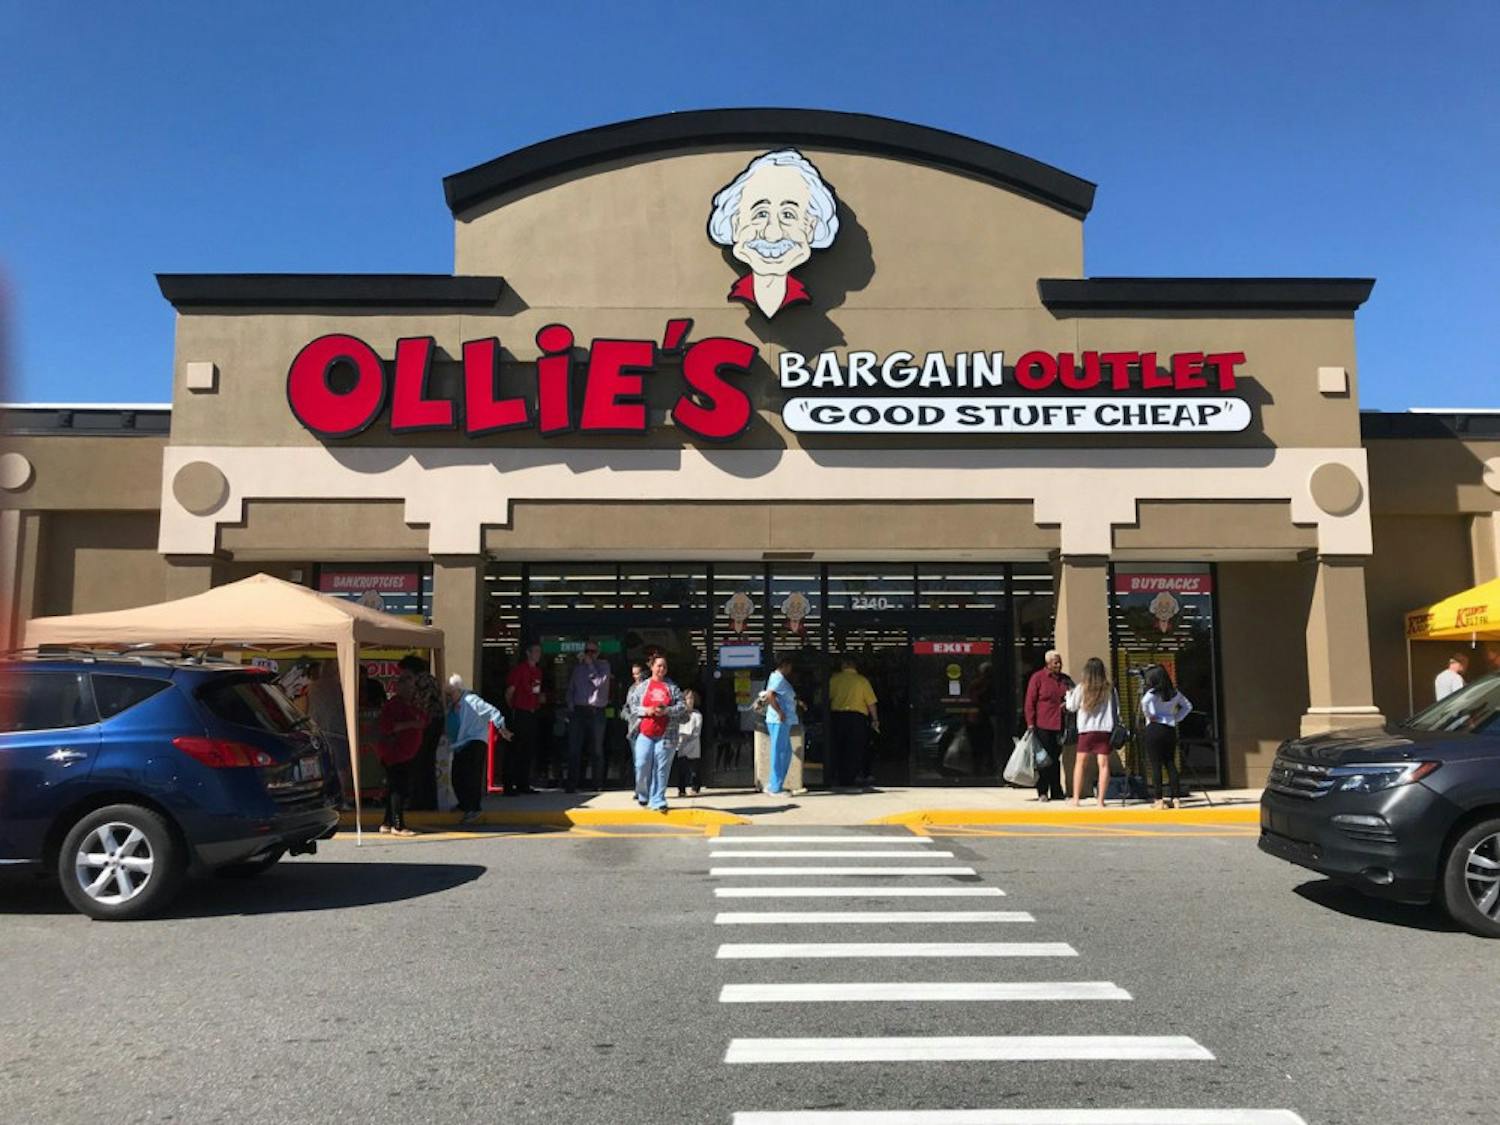 Customers walk in and out of Ollie’s Bargain&nbsp;Outlet,&nbsp;in Northside Shopping Center, located at&nbsp;2340 N Main St. The store opened Wednesday to hundreds of customers.&nbsp;
&nbsp;